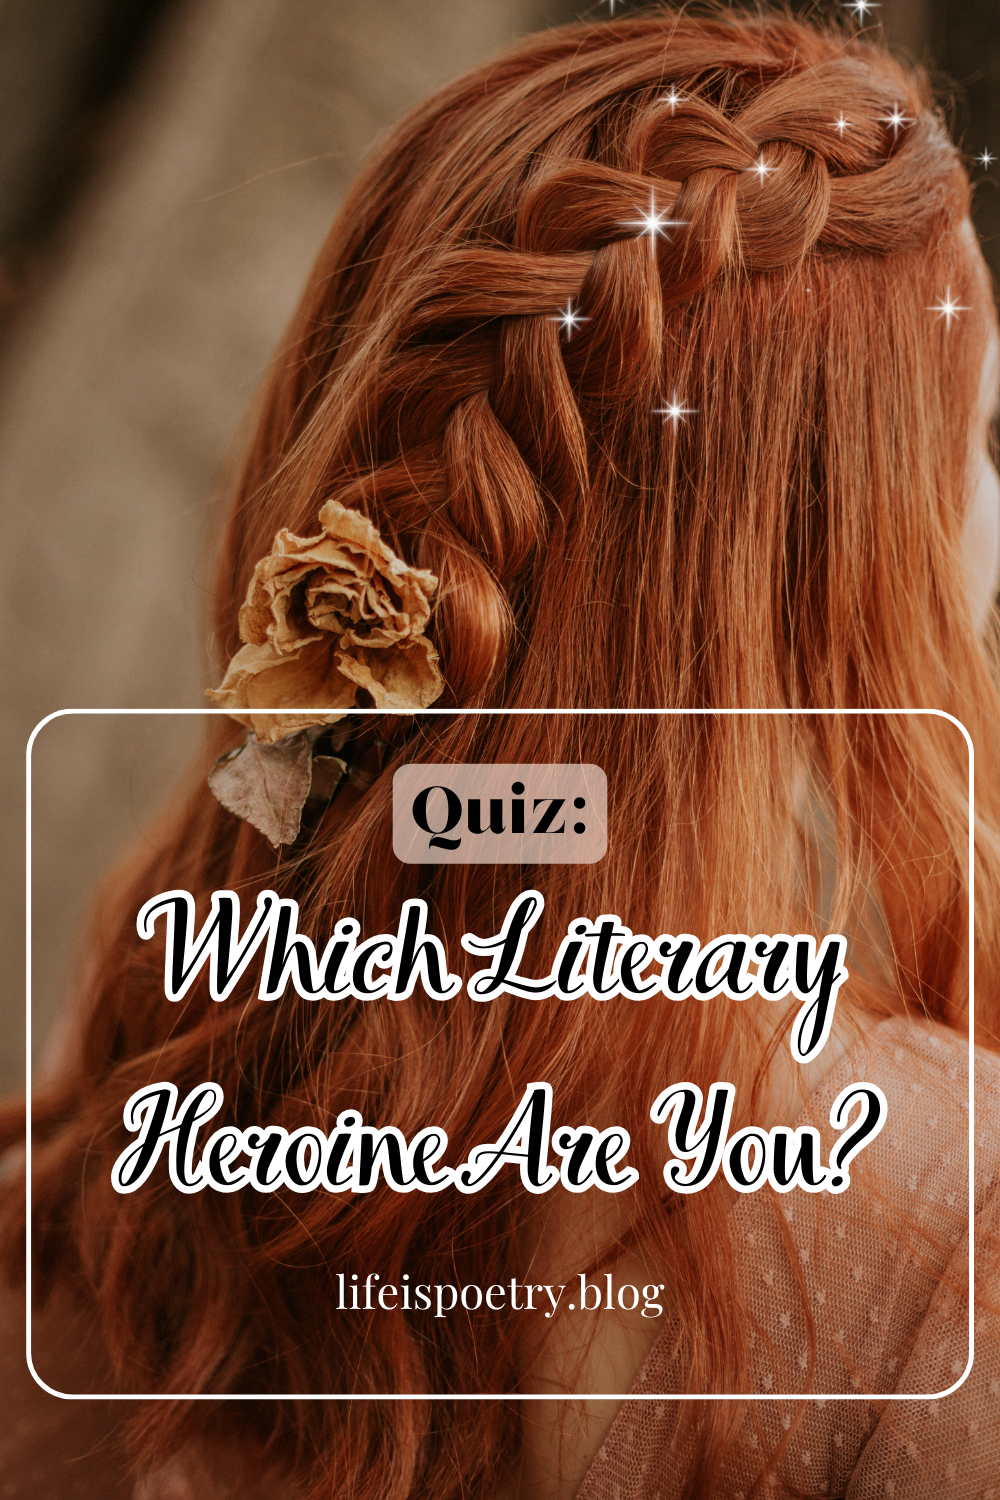 Quiz: Which Classic Literary Heroine Are You?